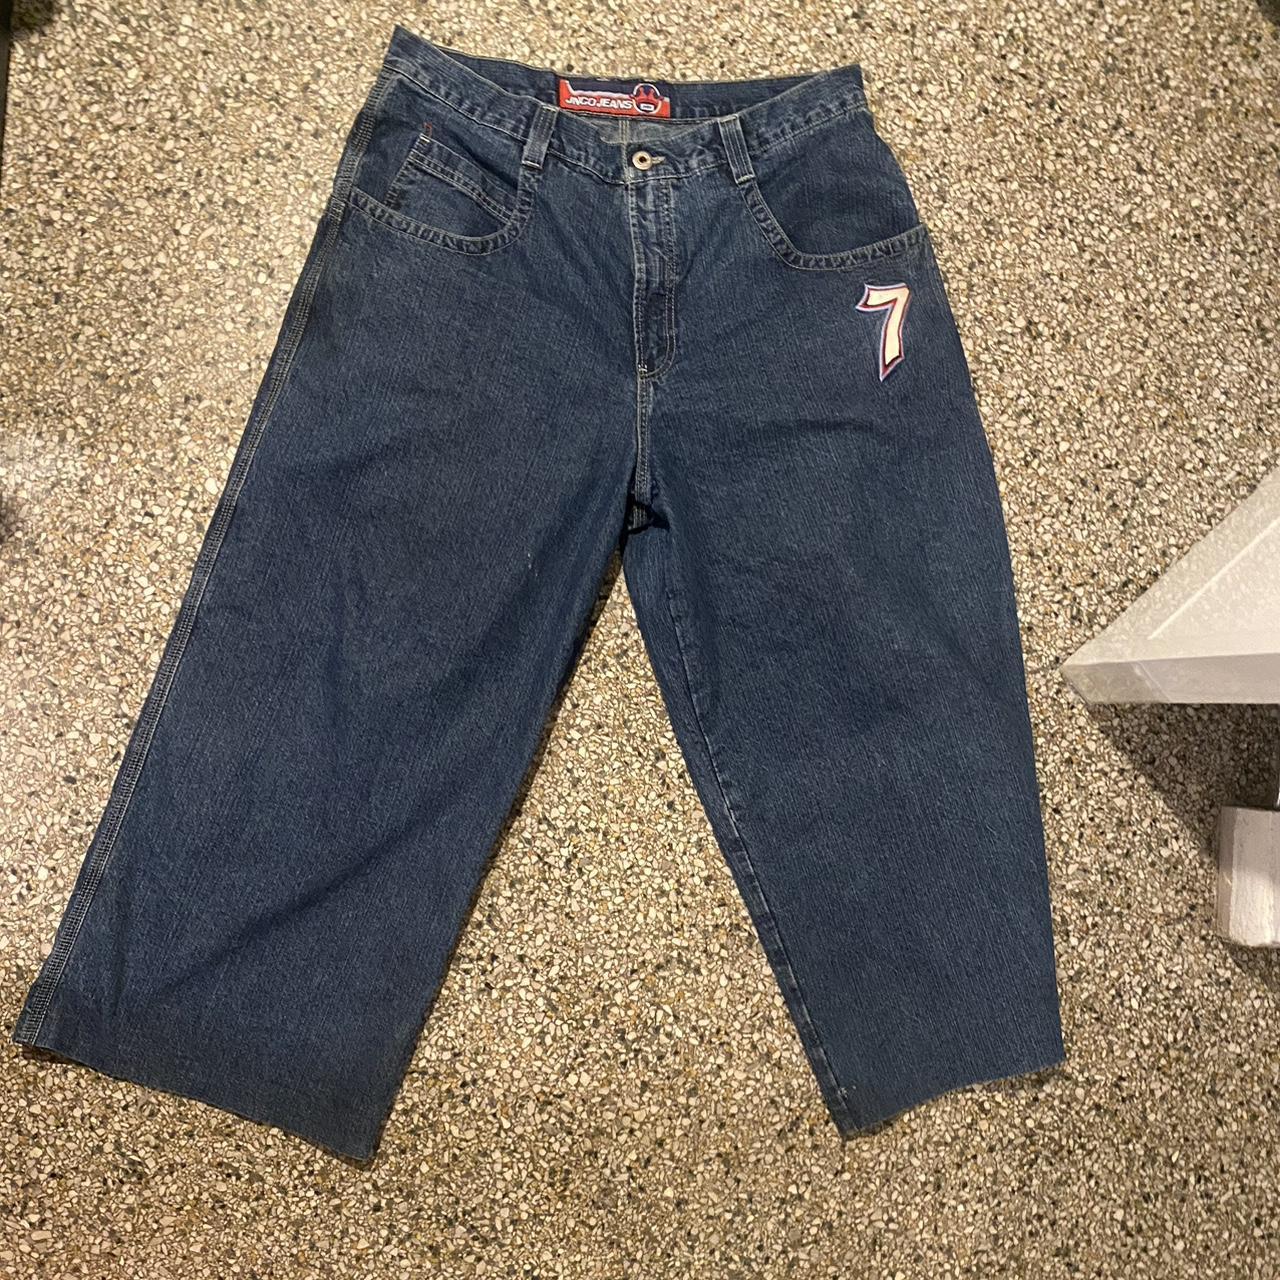 Rare one of one complete grails jnco dice jeans so... - Depop